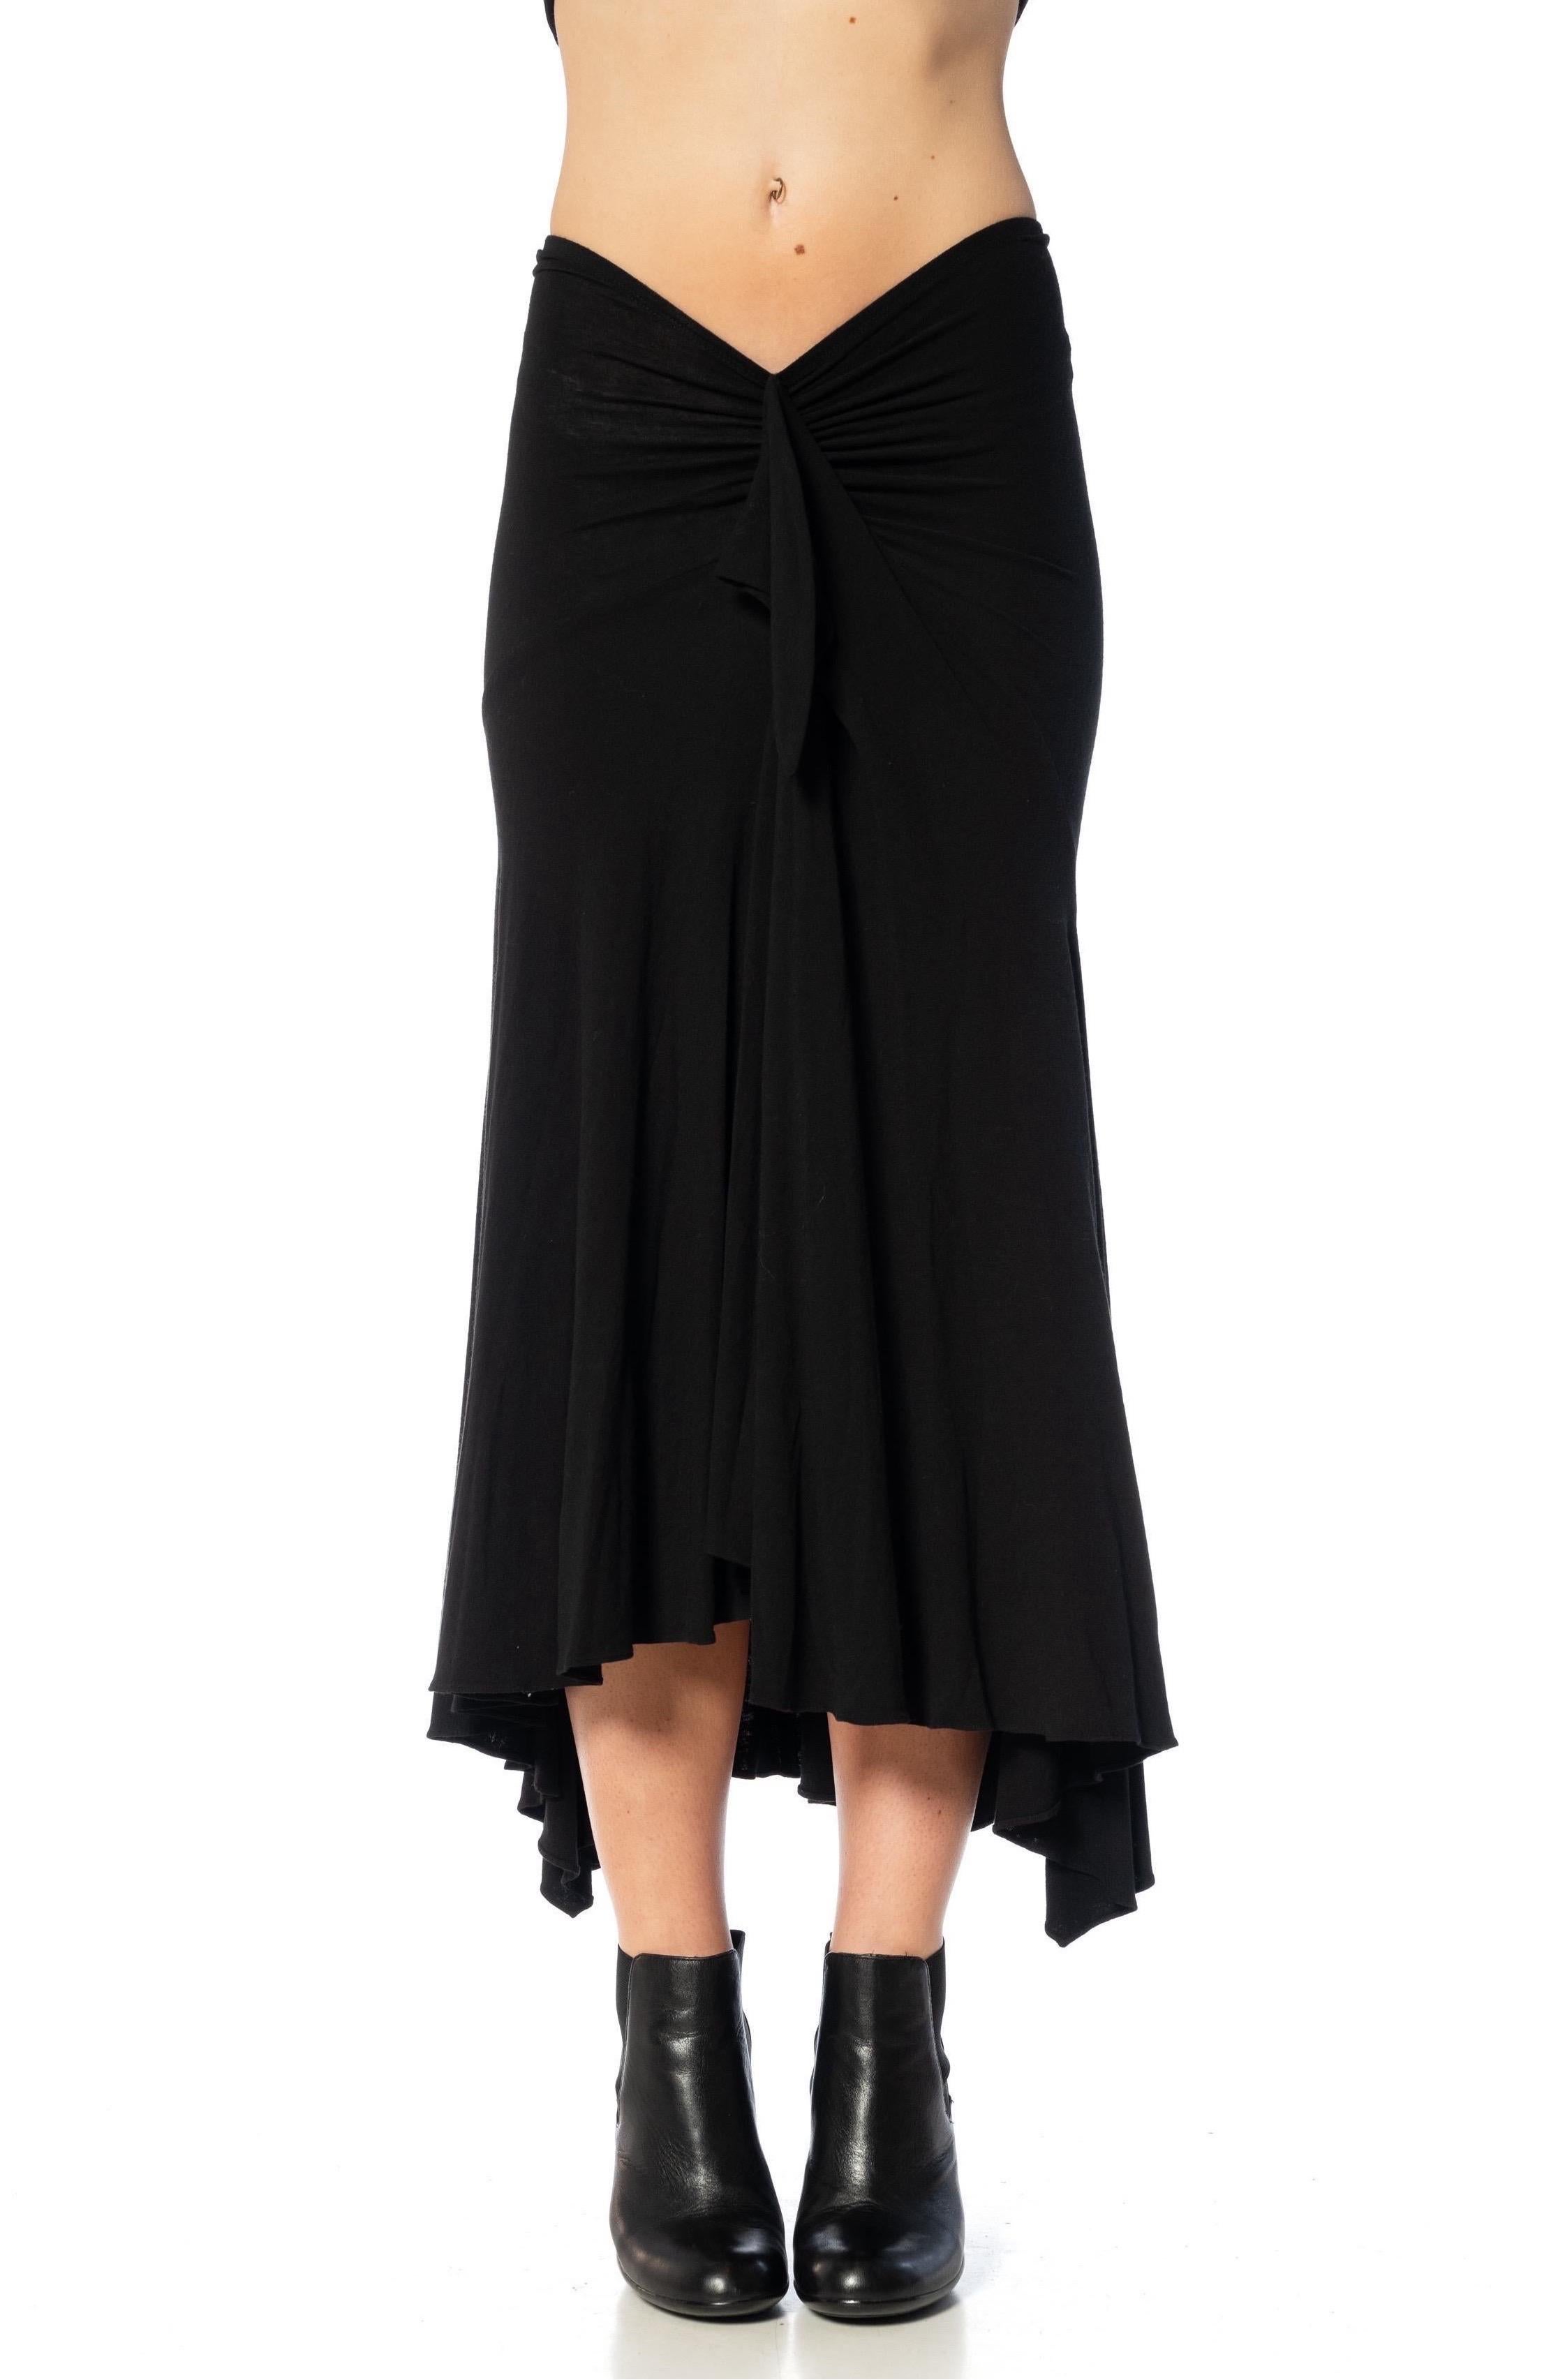 1990S DONNA KARAN Black Rayon Ruffled Draped Skirt In Excellent Condition For Sale In New York, NY